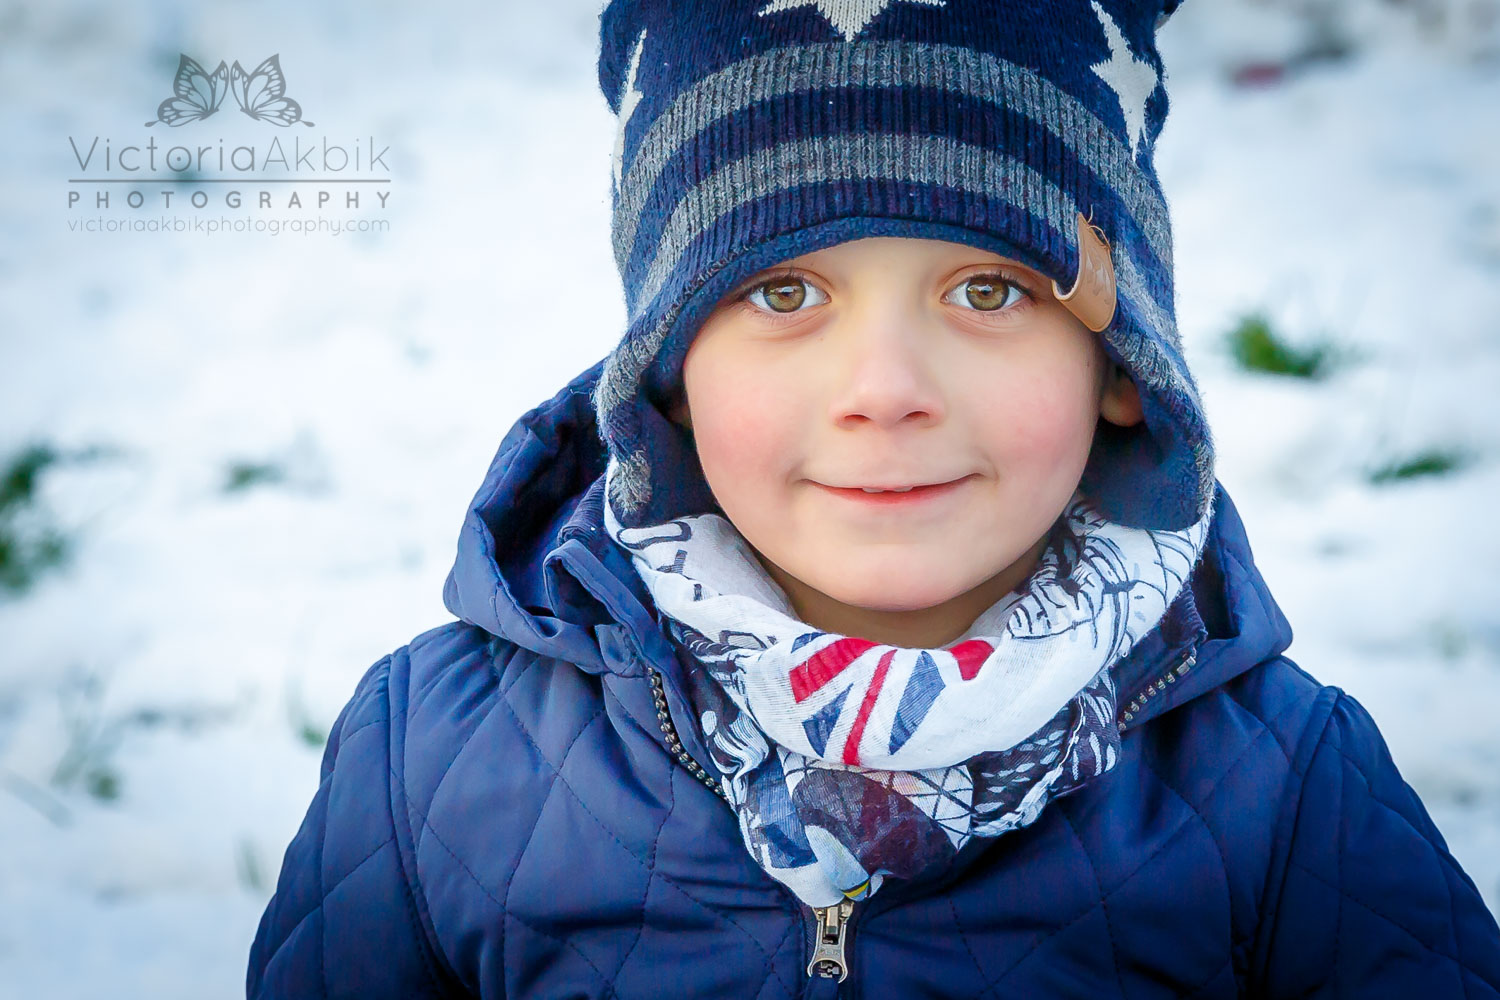 A Winter Tale | Lifestyle Photography » Victoria Akbik Photography